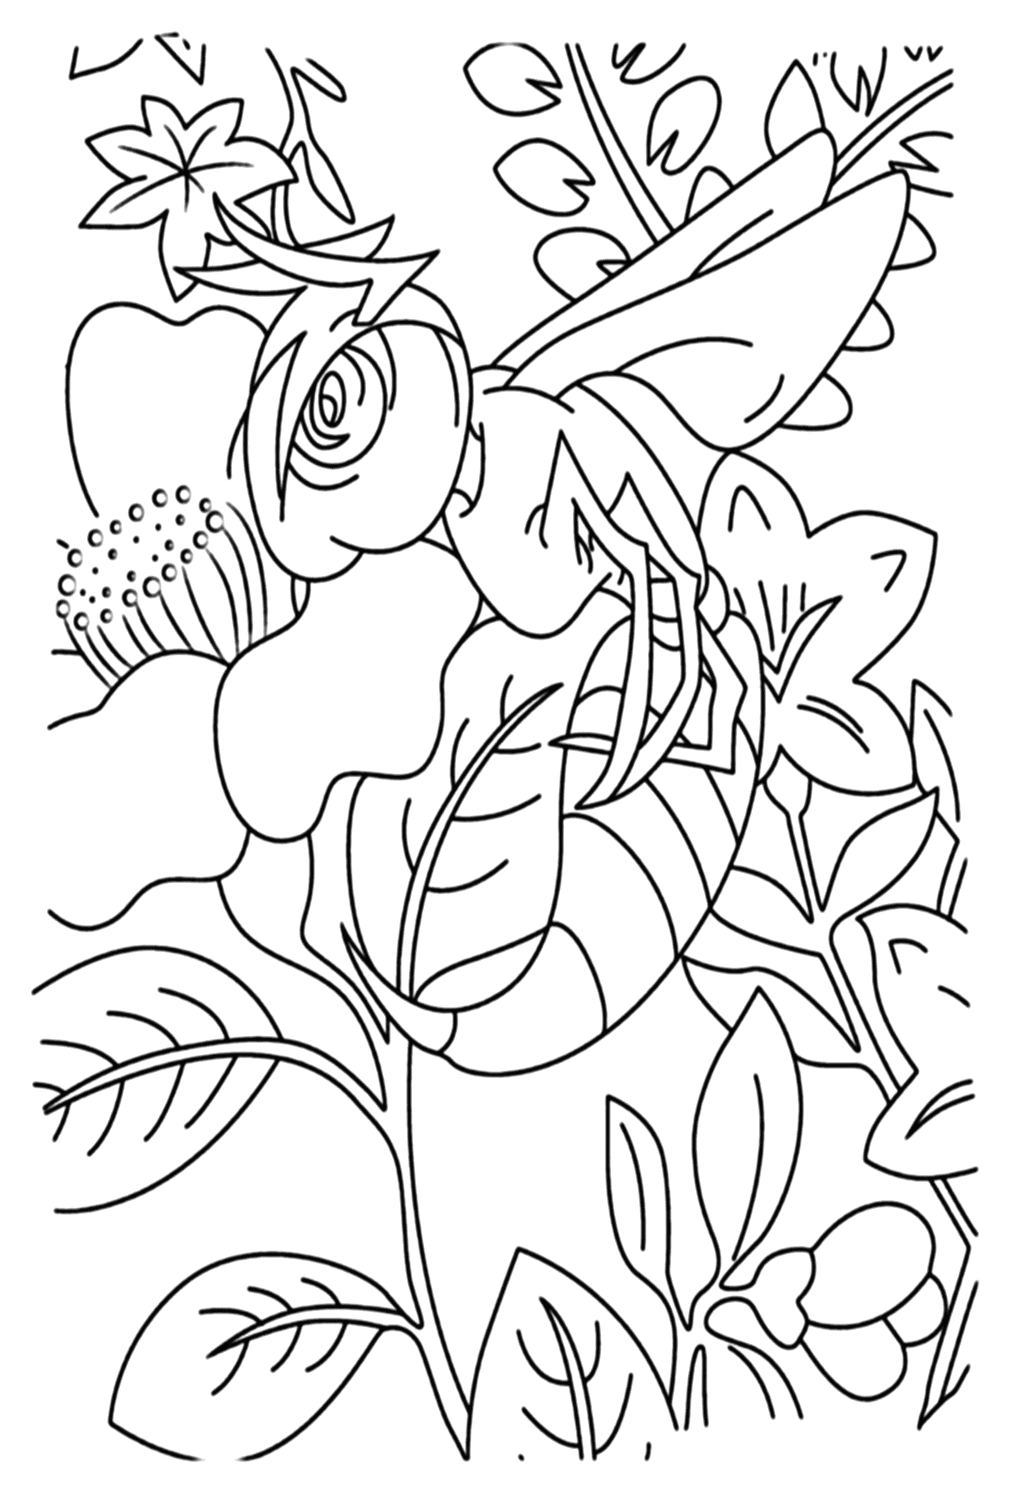 Wasp Coloring Page Free from Wasp